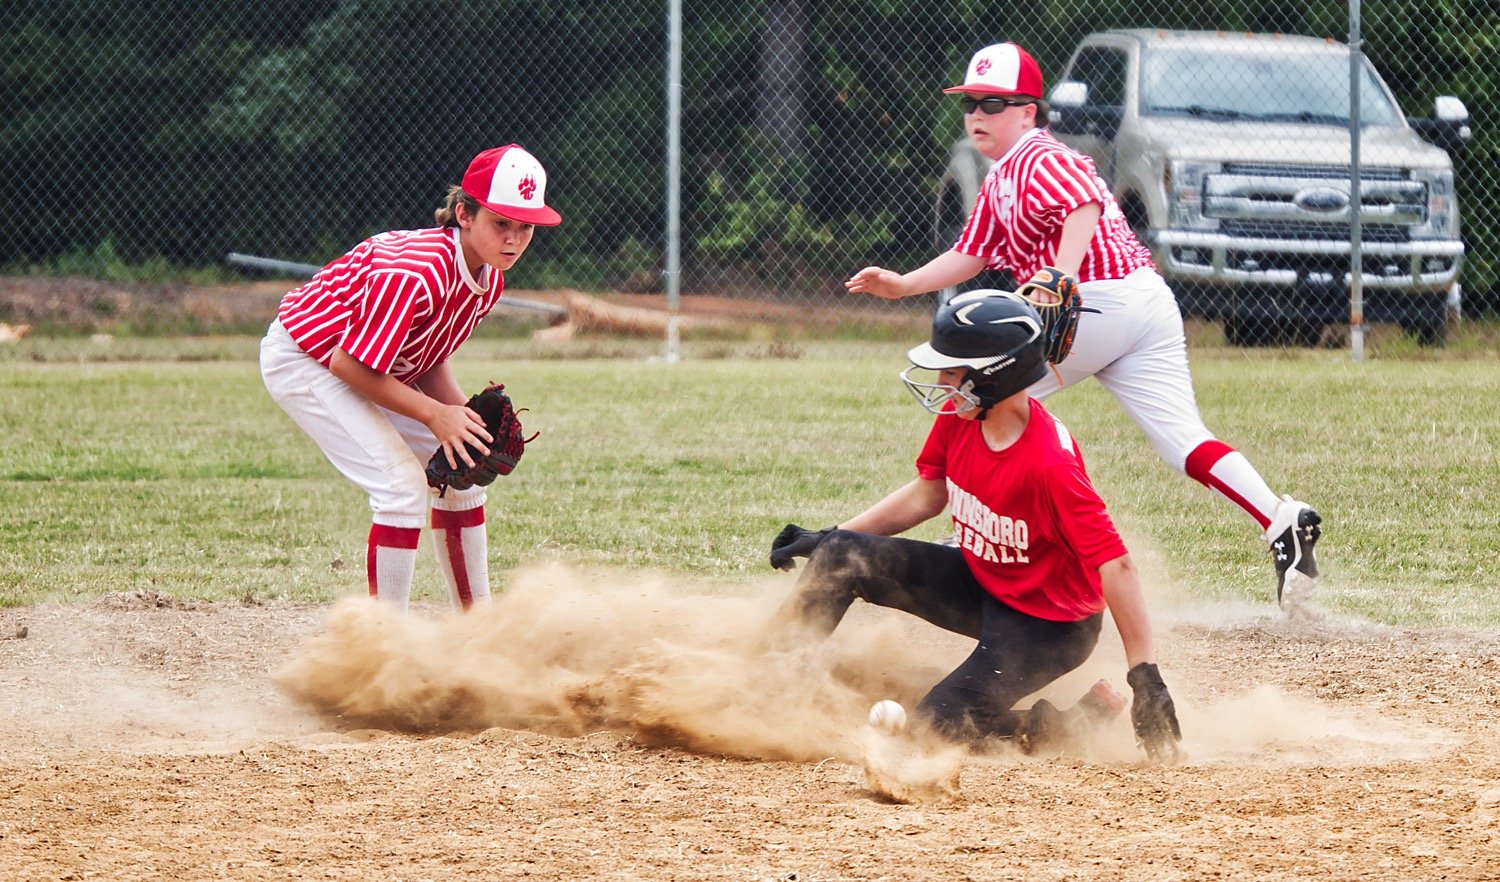 Winnsboro and Alba-Golden faced off in the 10 and under category.